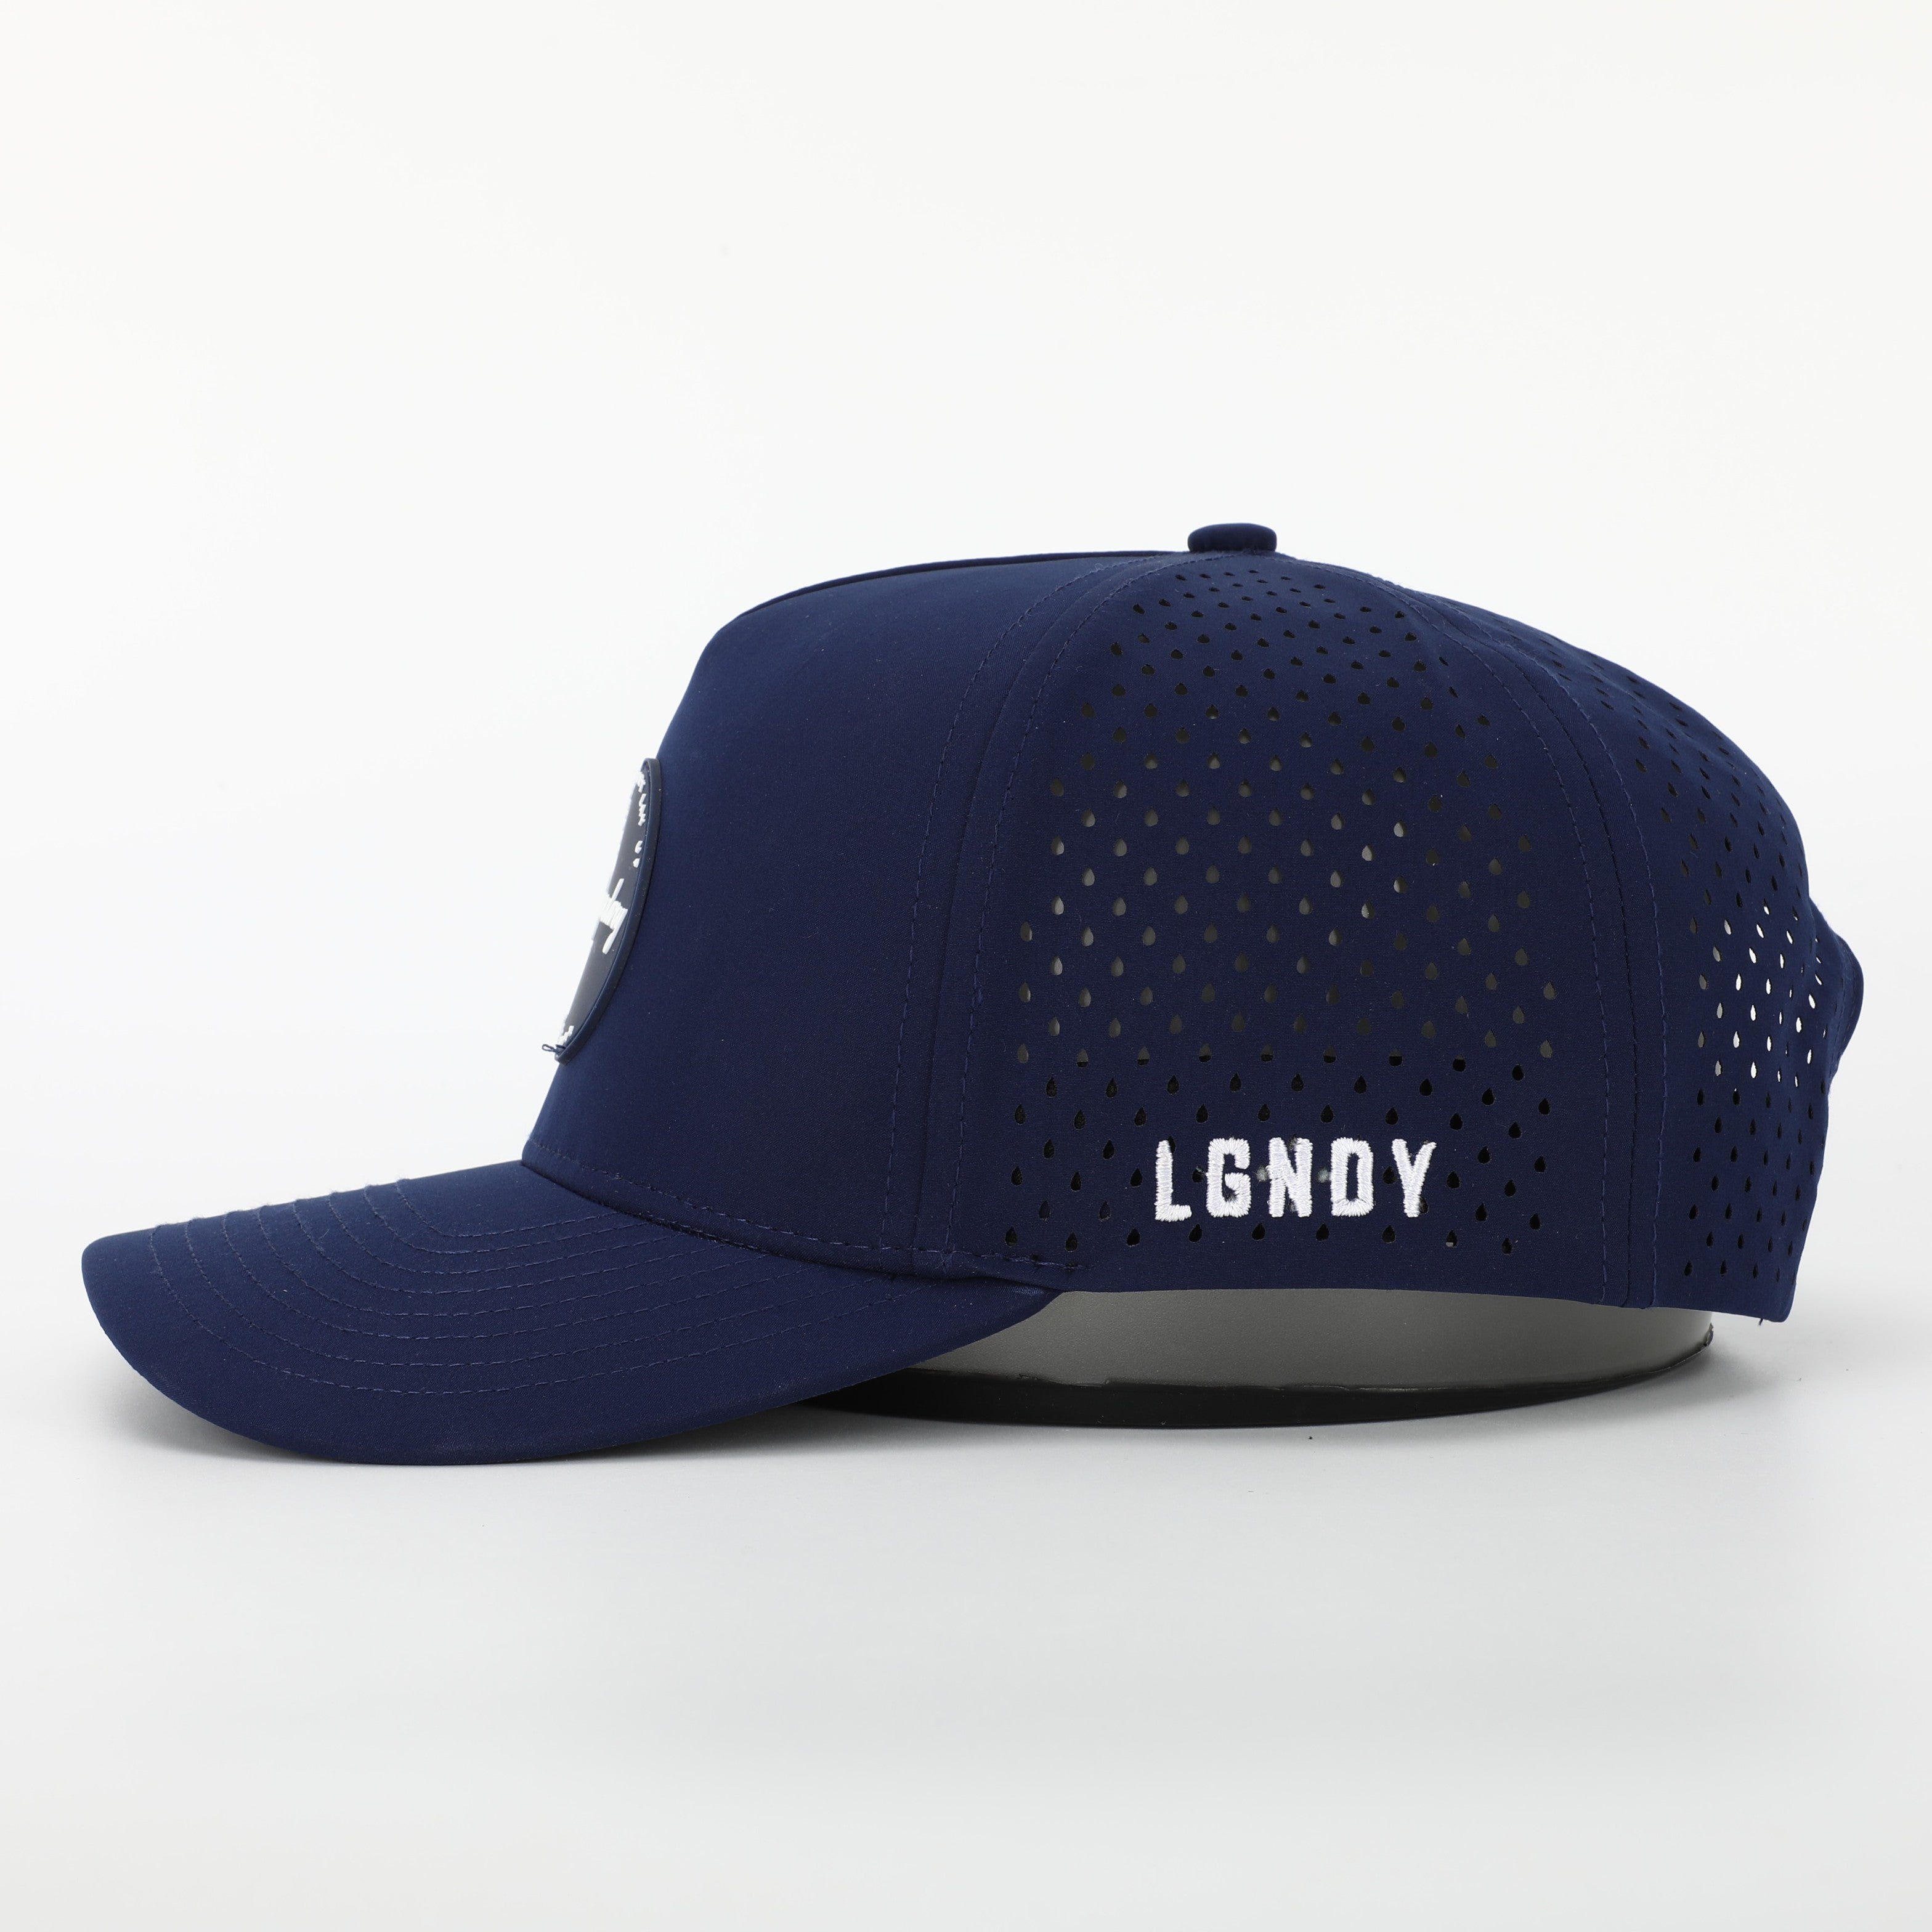 Go For It Hat - Navy Blue